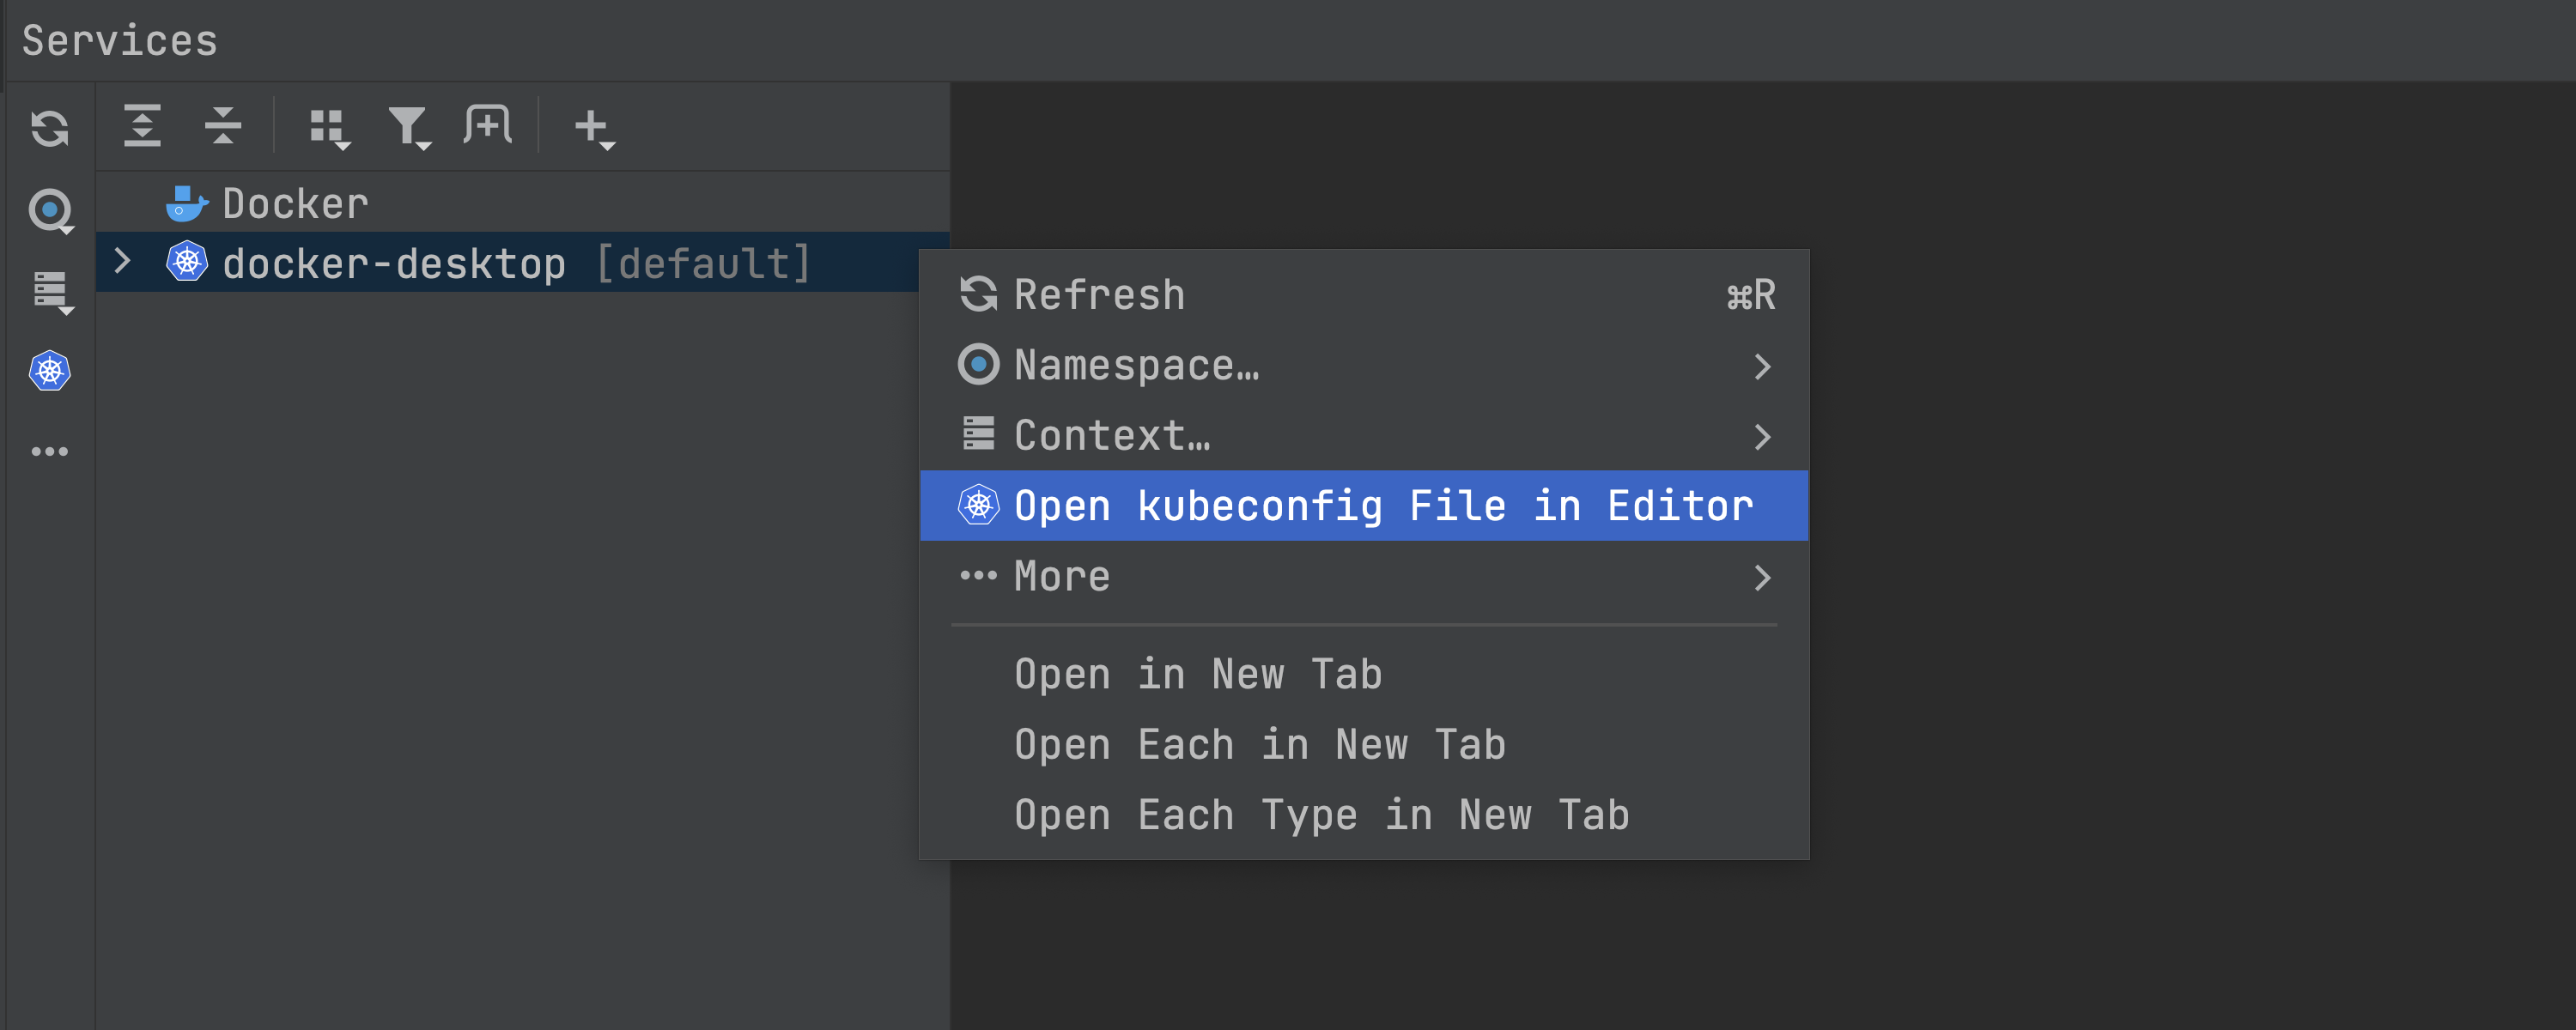 Opening a kubeconfig file in the editor from the Services view